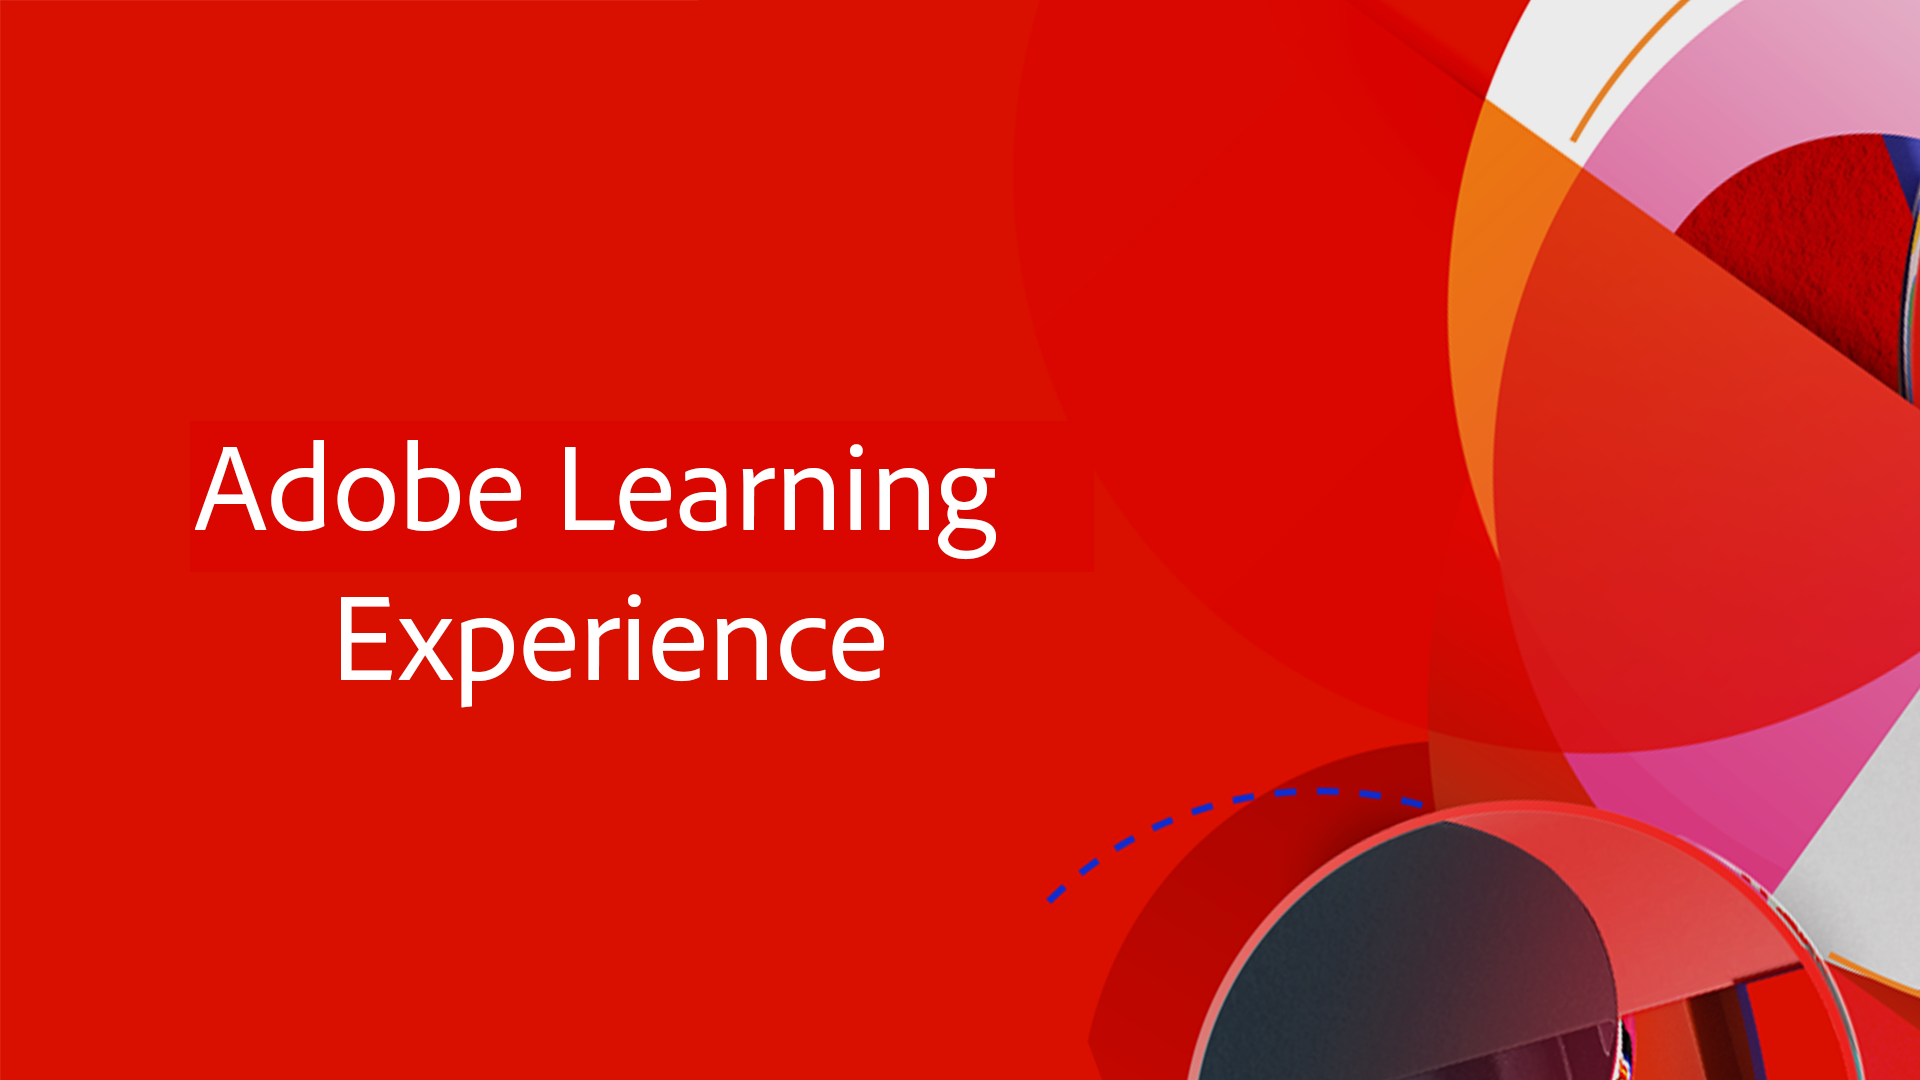 Adobe Learning Experience